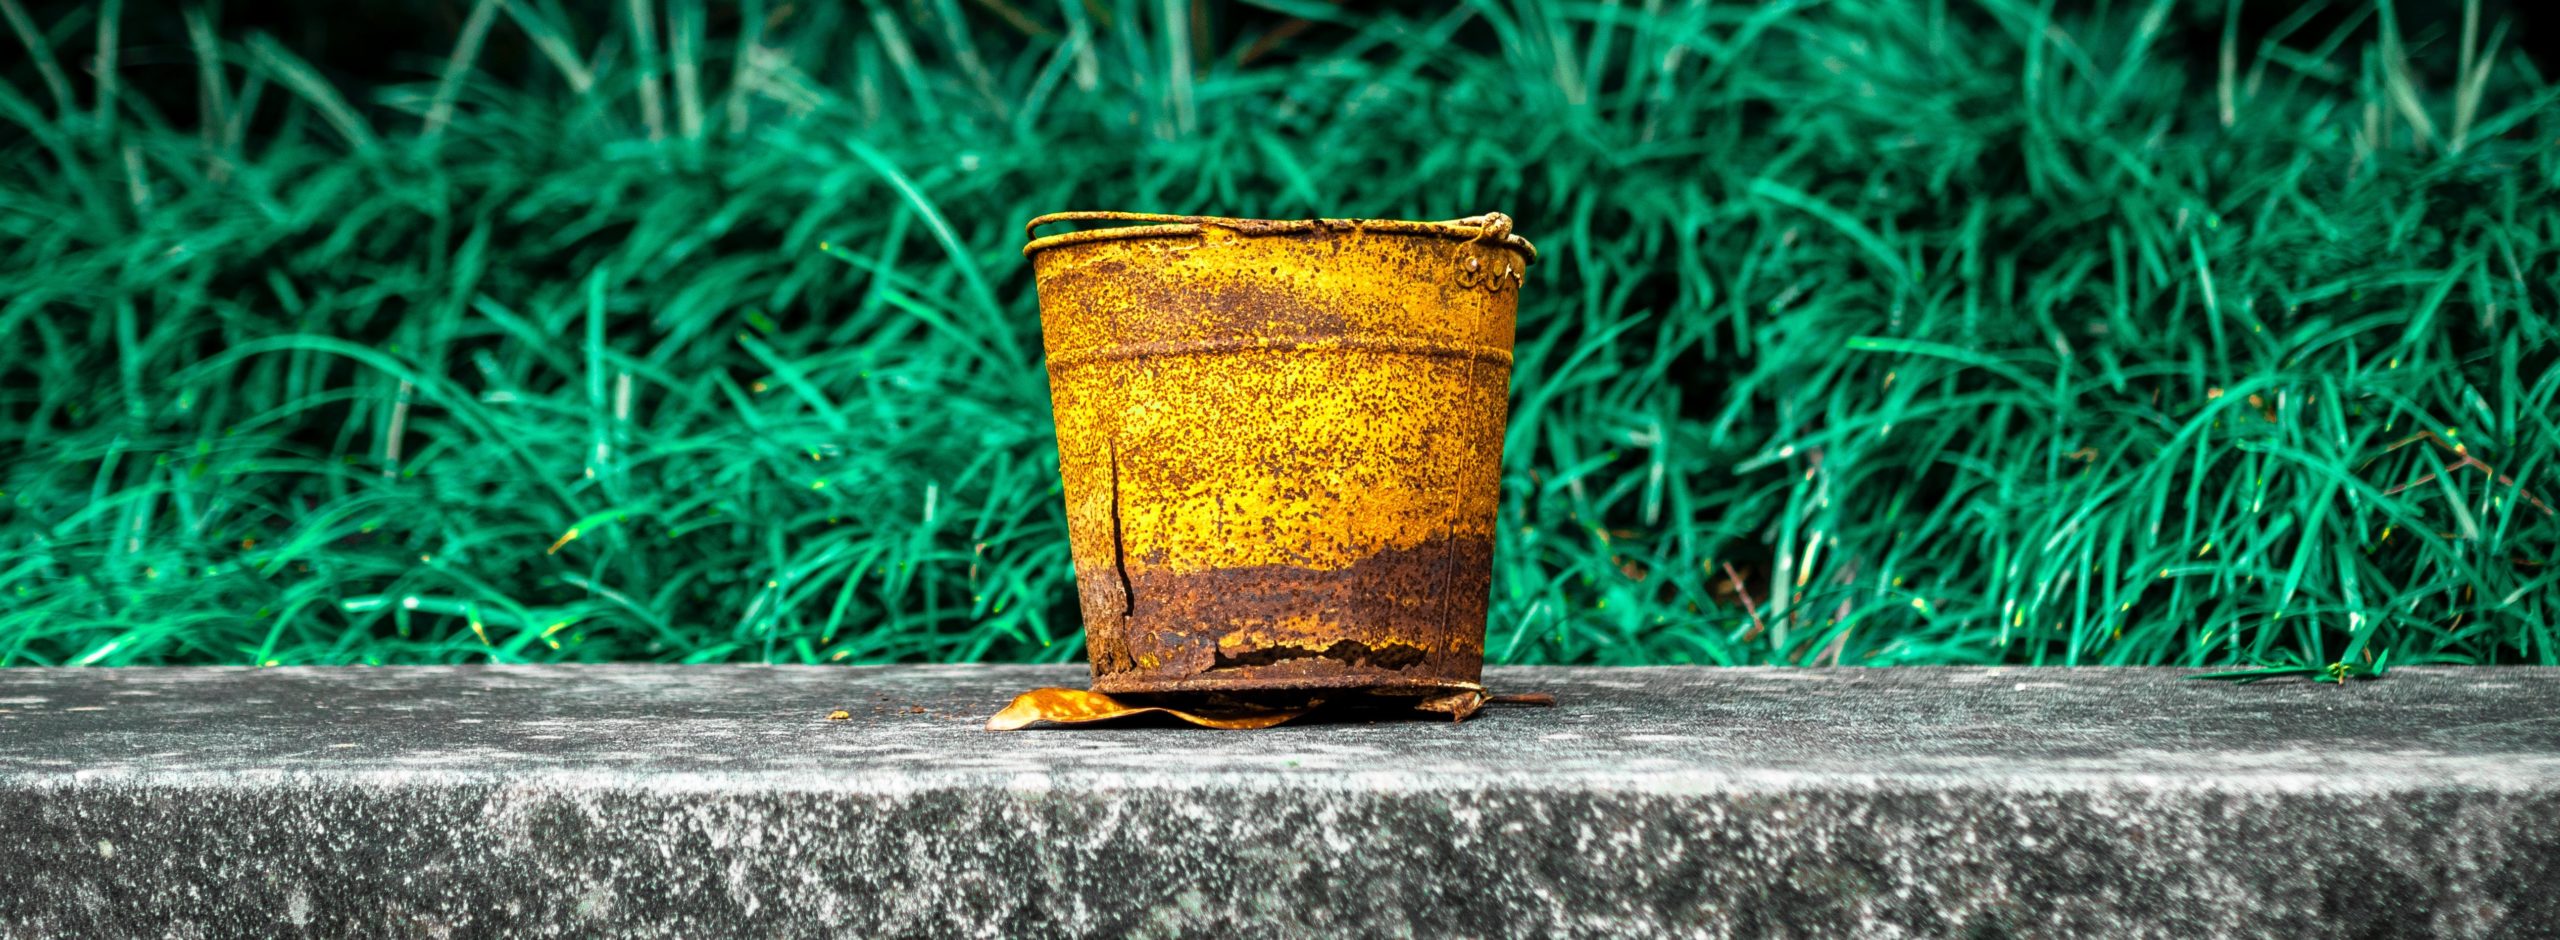 Rusted bucket needs repair so it can be useful